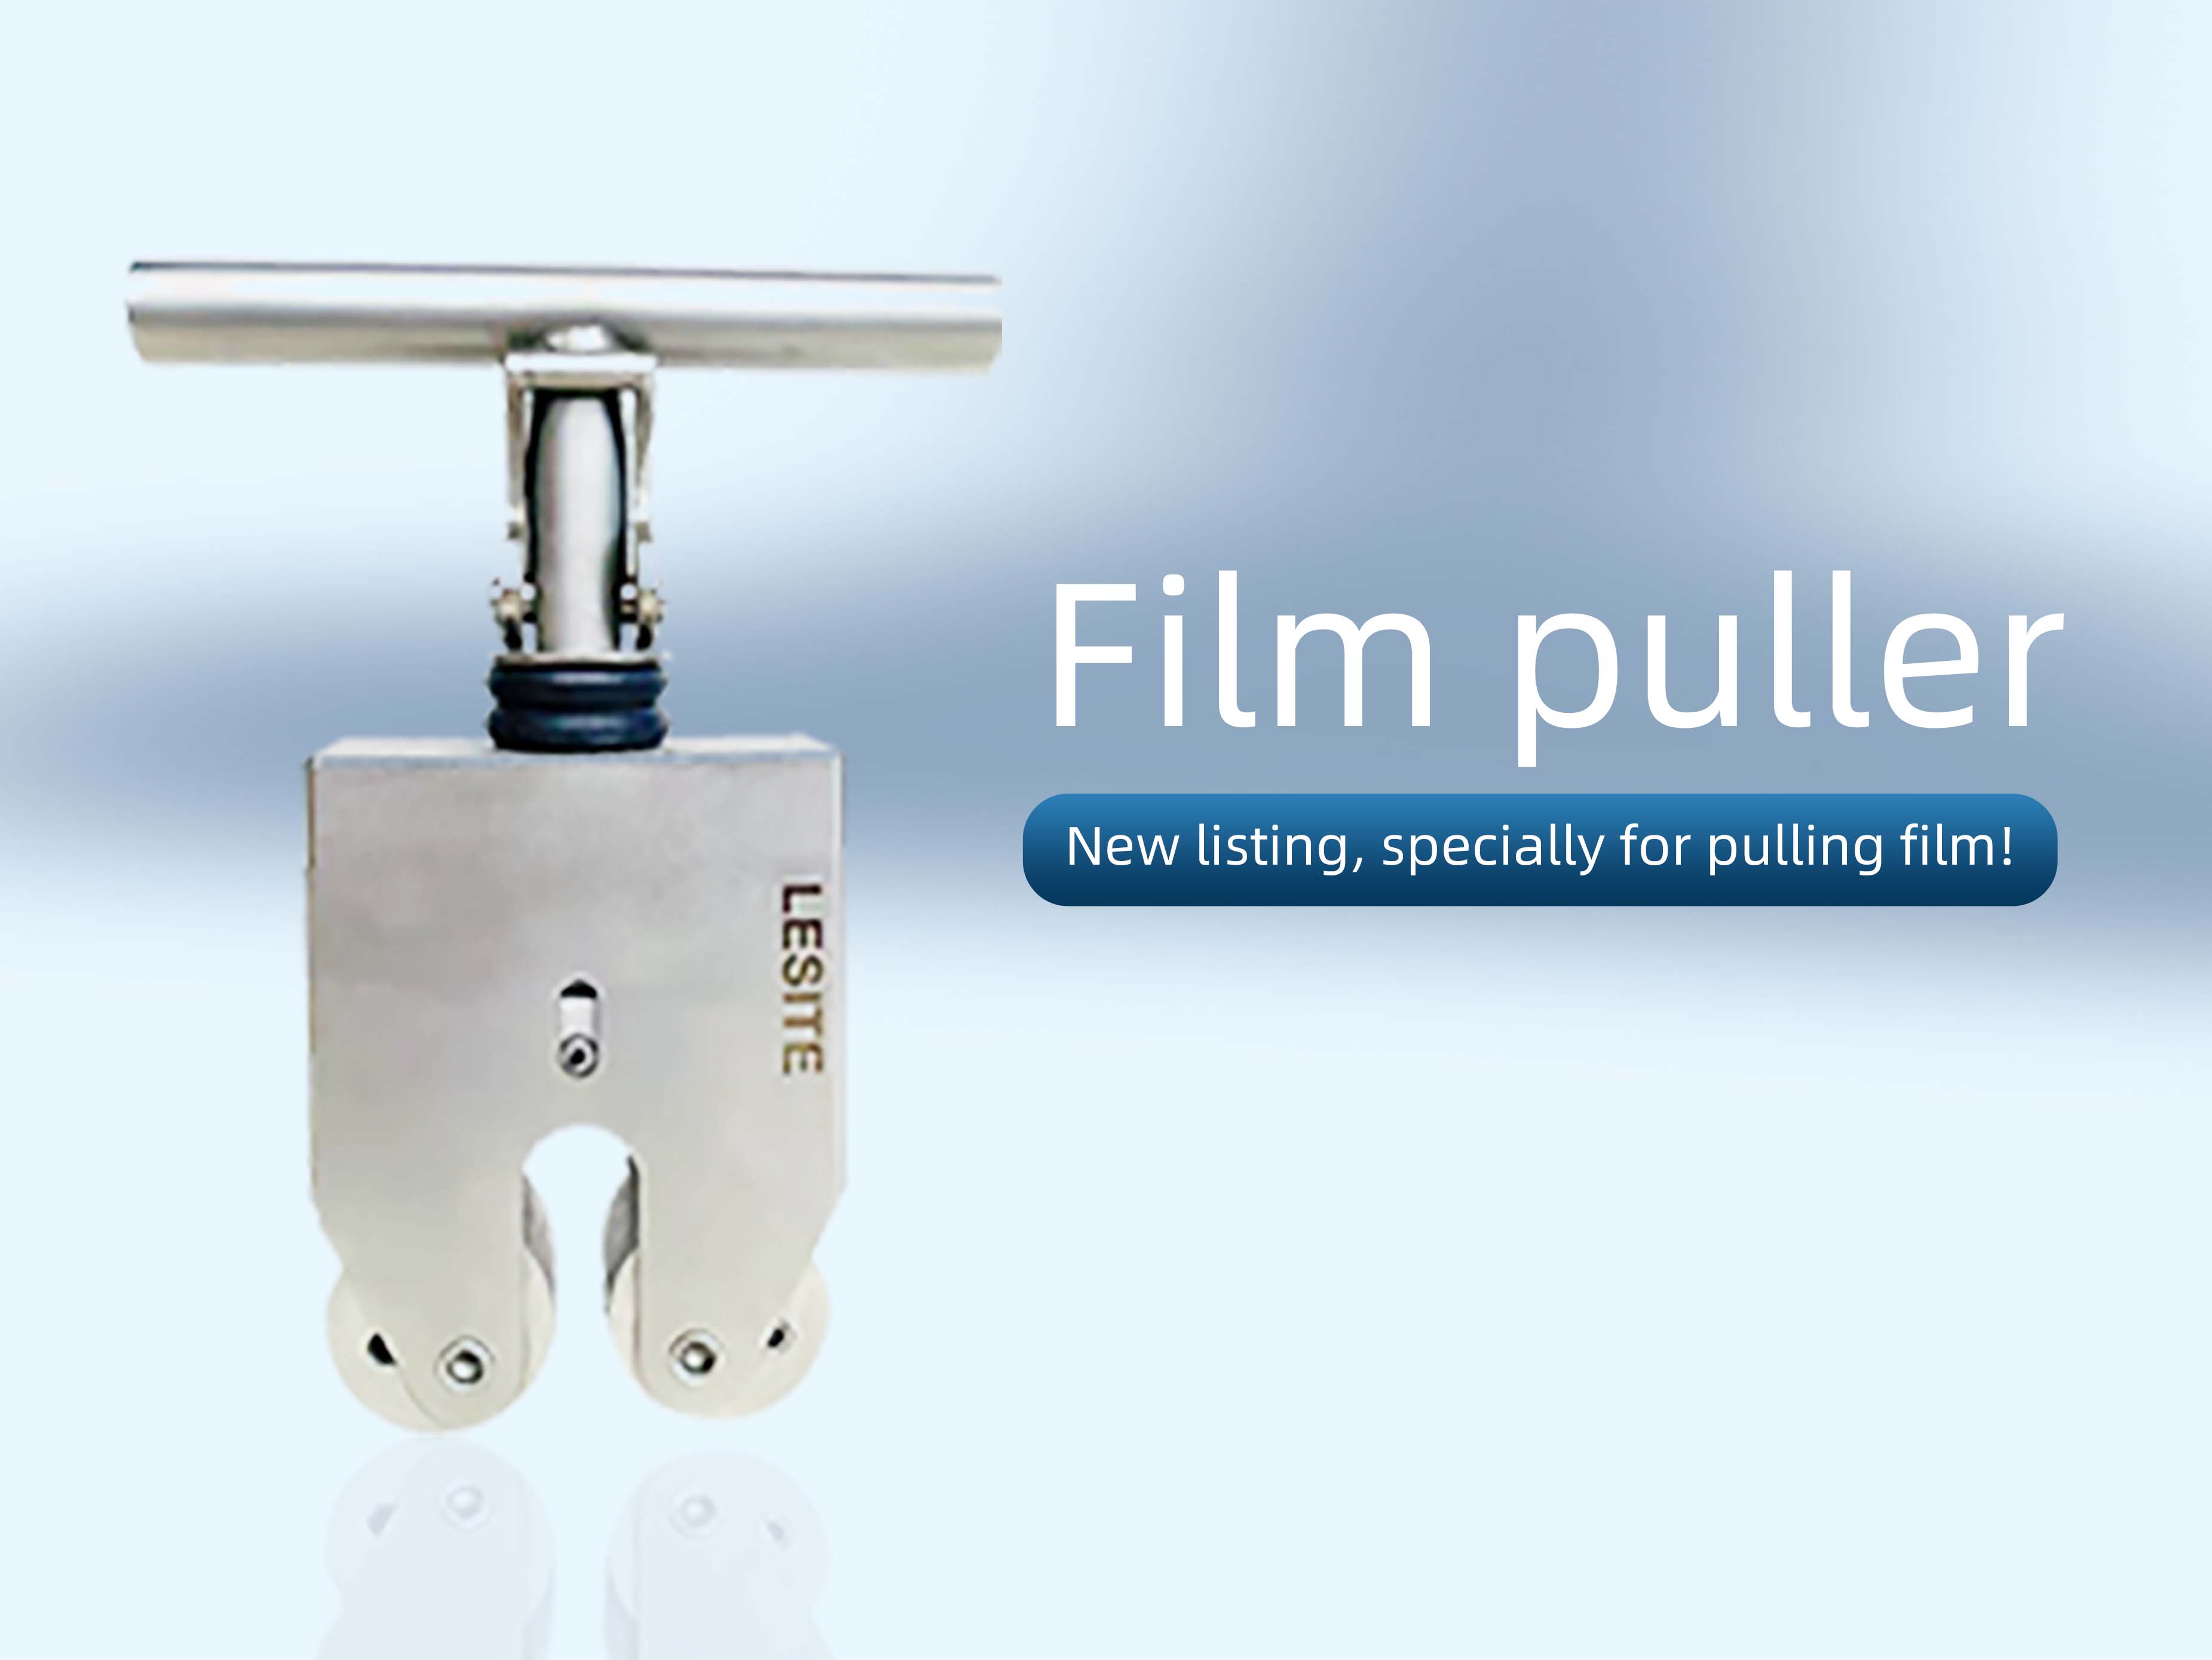 Made for Pulling Films | Solid and Reliable, the Lesite Film puller is New!